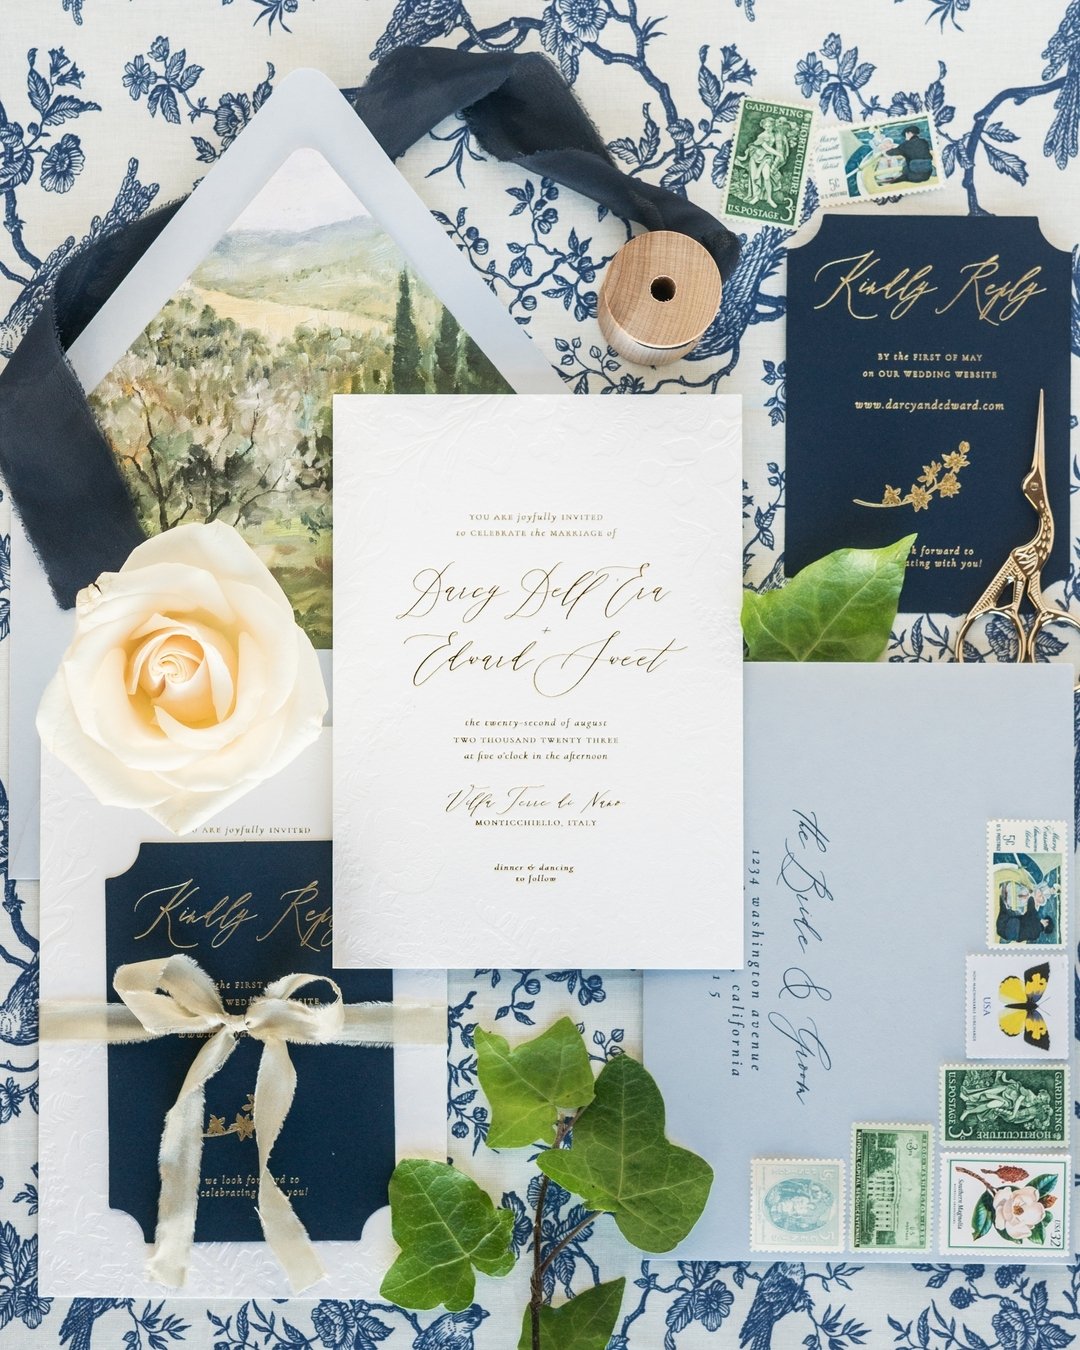 I didn't go into wedding planning with any interest in making my own wedding invitations, let alone starting a business doing it. When I realized that I wanted a suite I couldn't quite find, I decided to utilize some graphic design experience from my